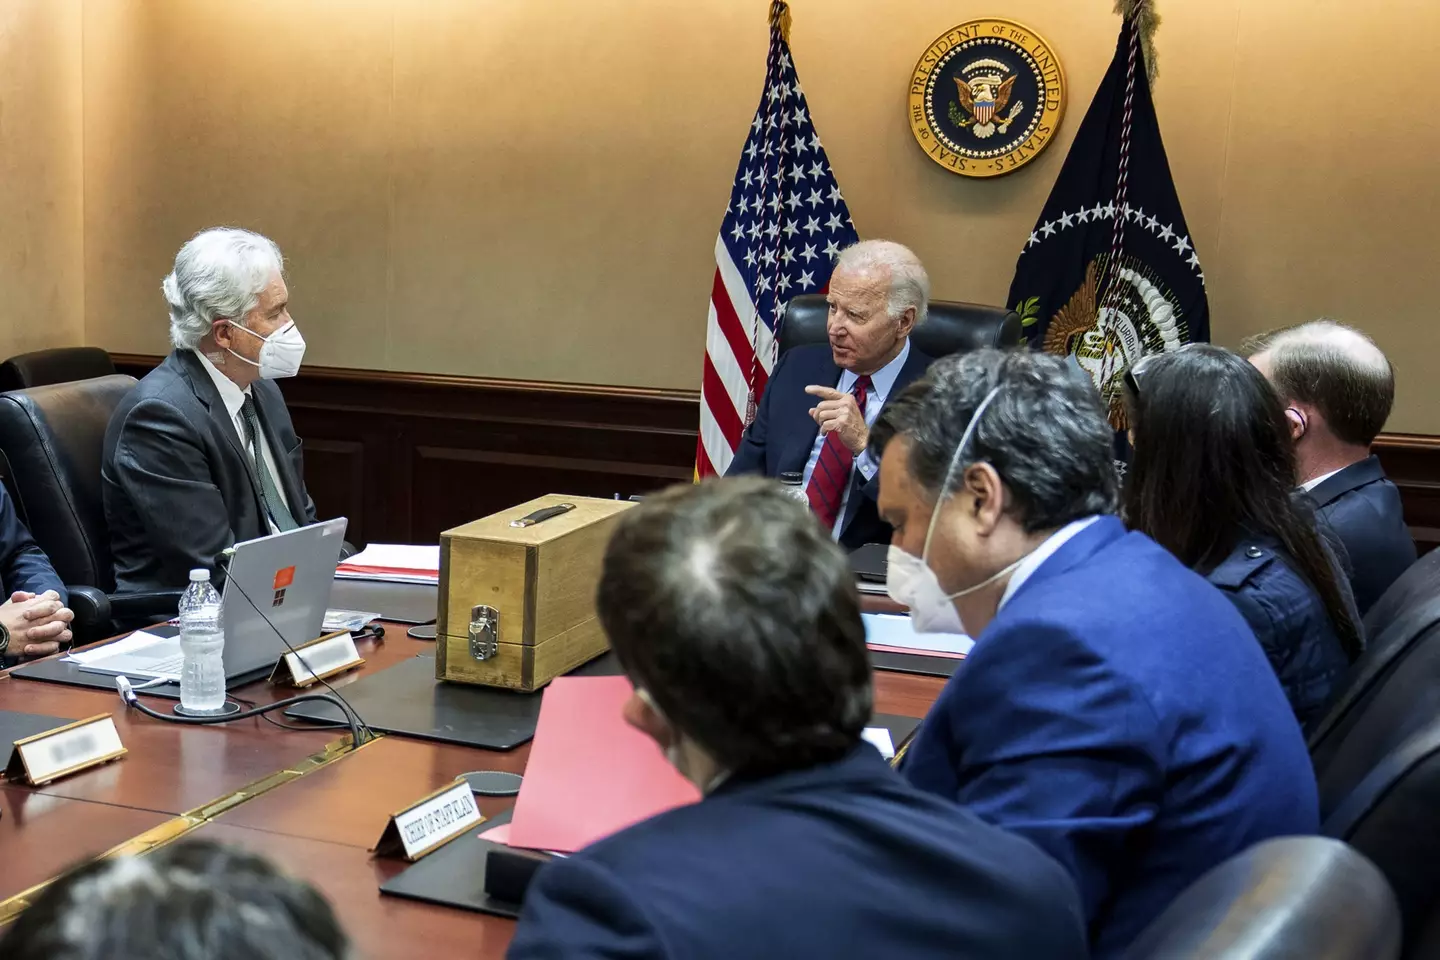 US president Joe Biden was briefed on the operation to find and kill al-Zawahiri by intelligence advisers, who showed him a model of the house al-Zawahiri was thought to be staying in.